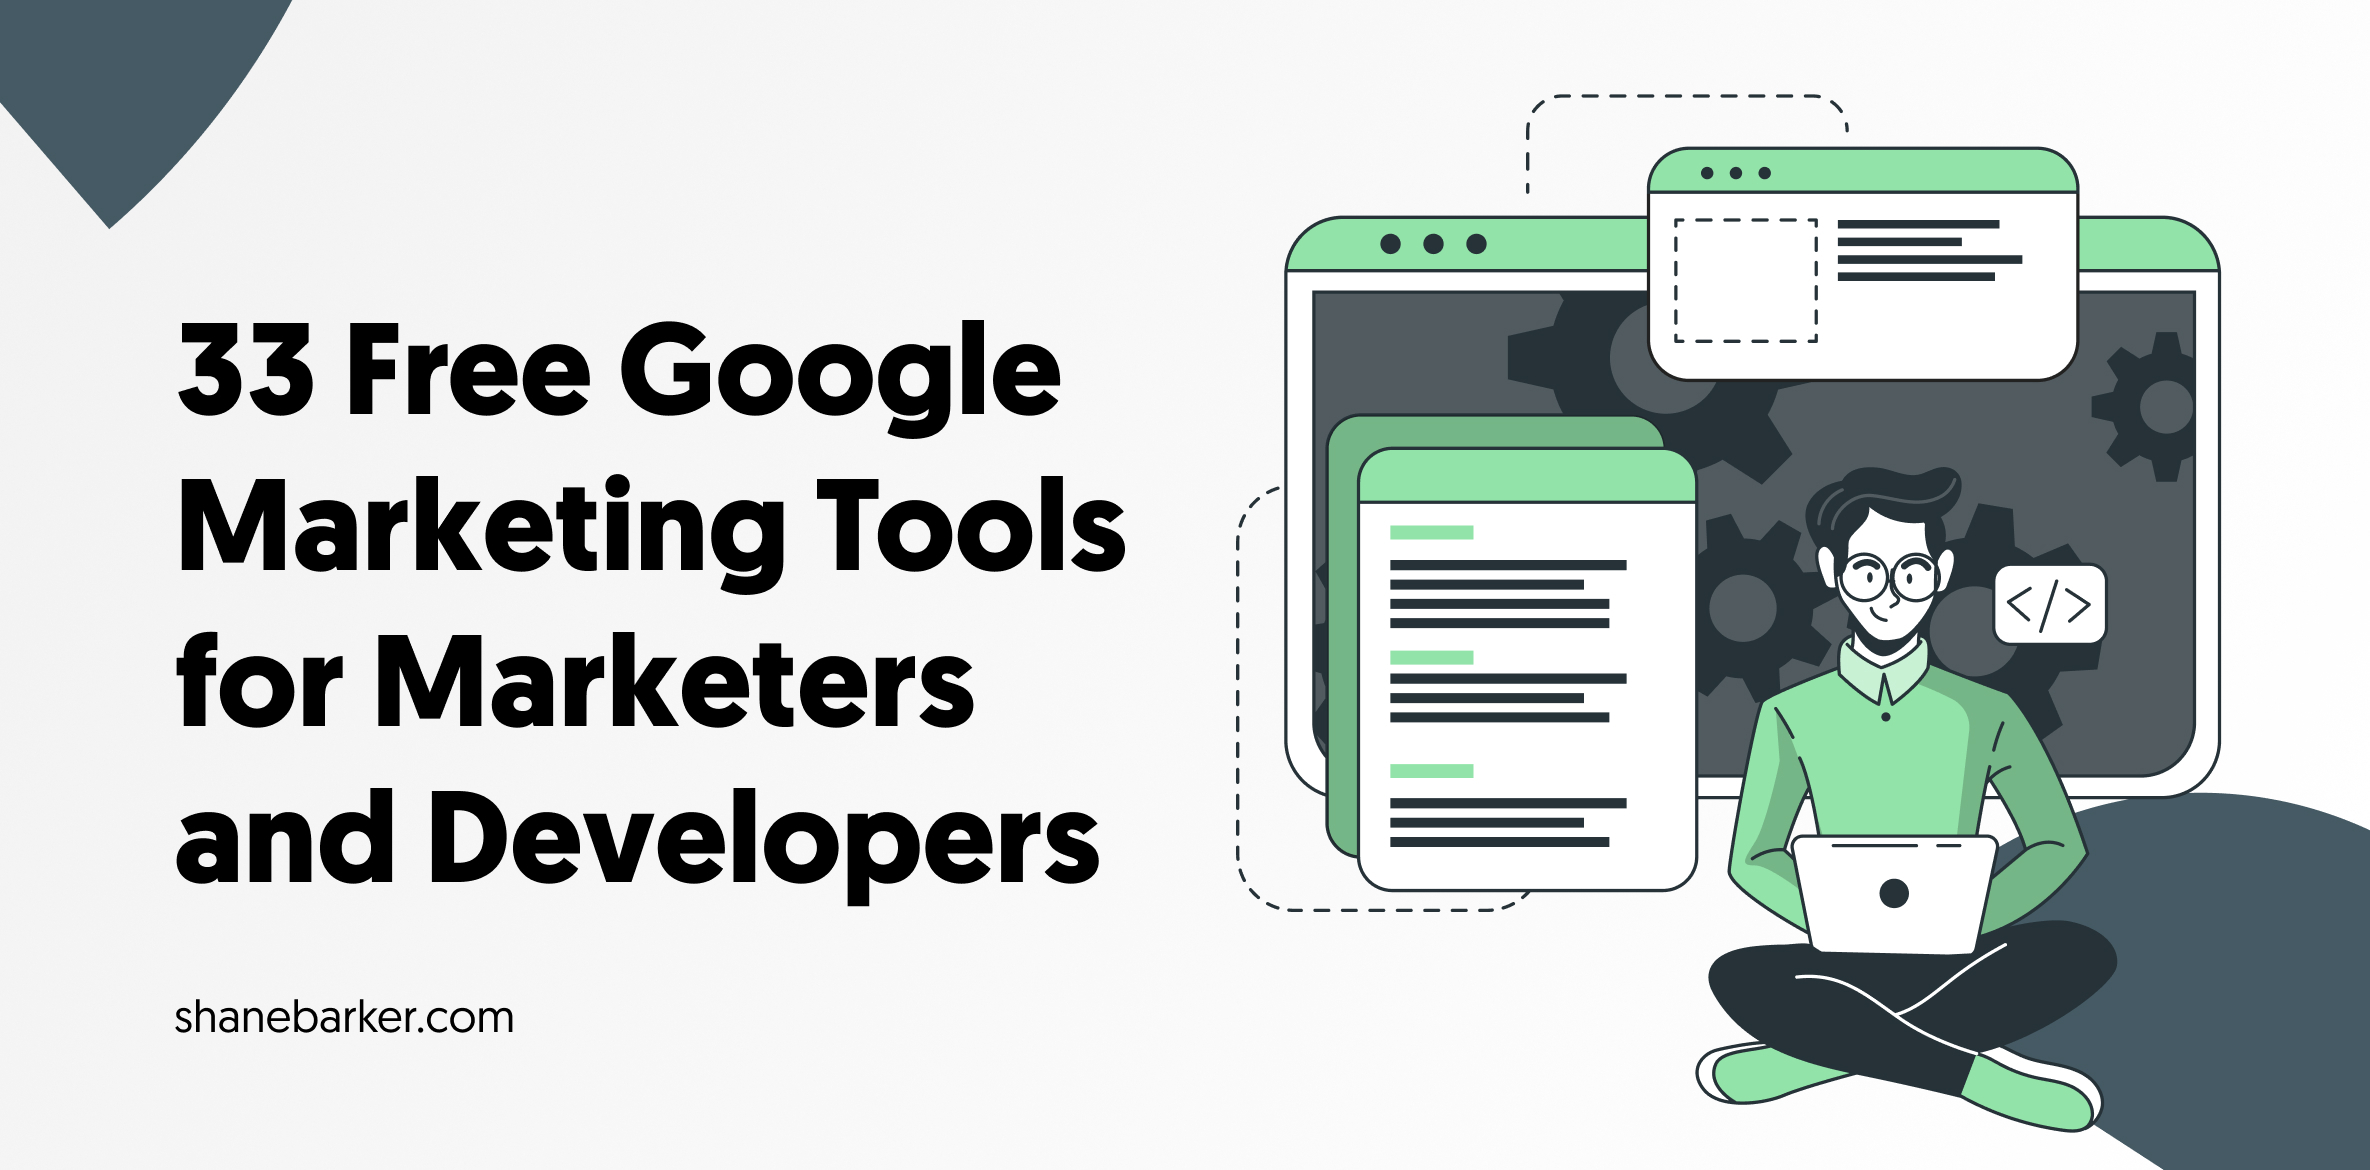 33 Free Google Marketing Tools for Marketers and Developers